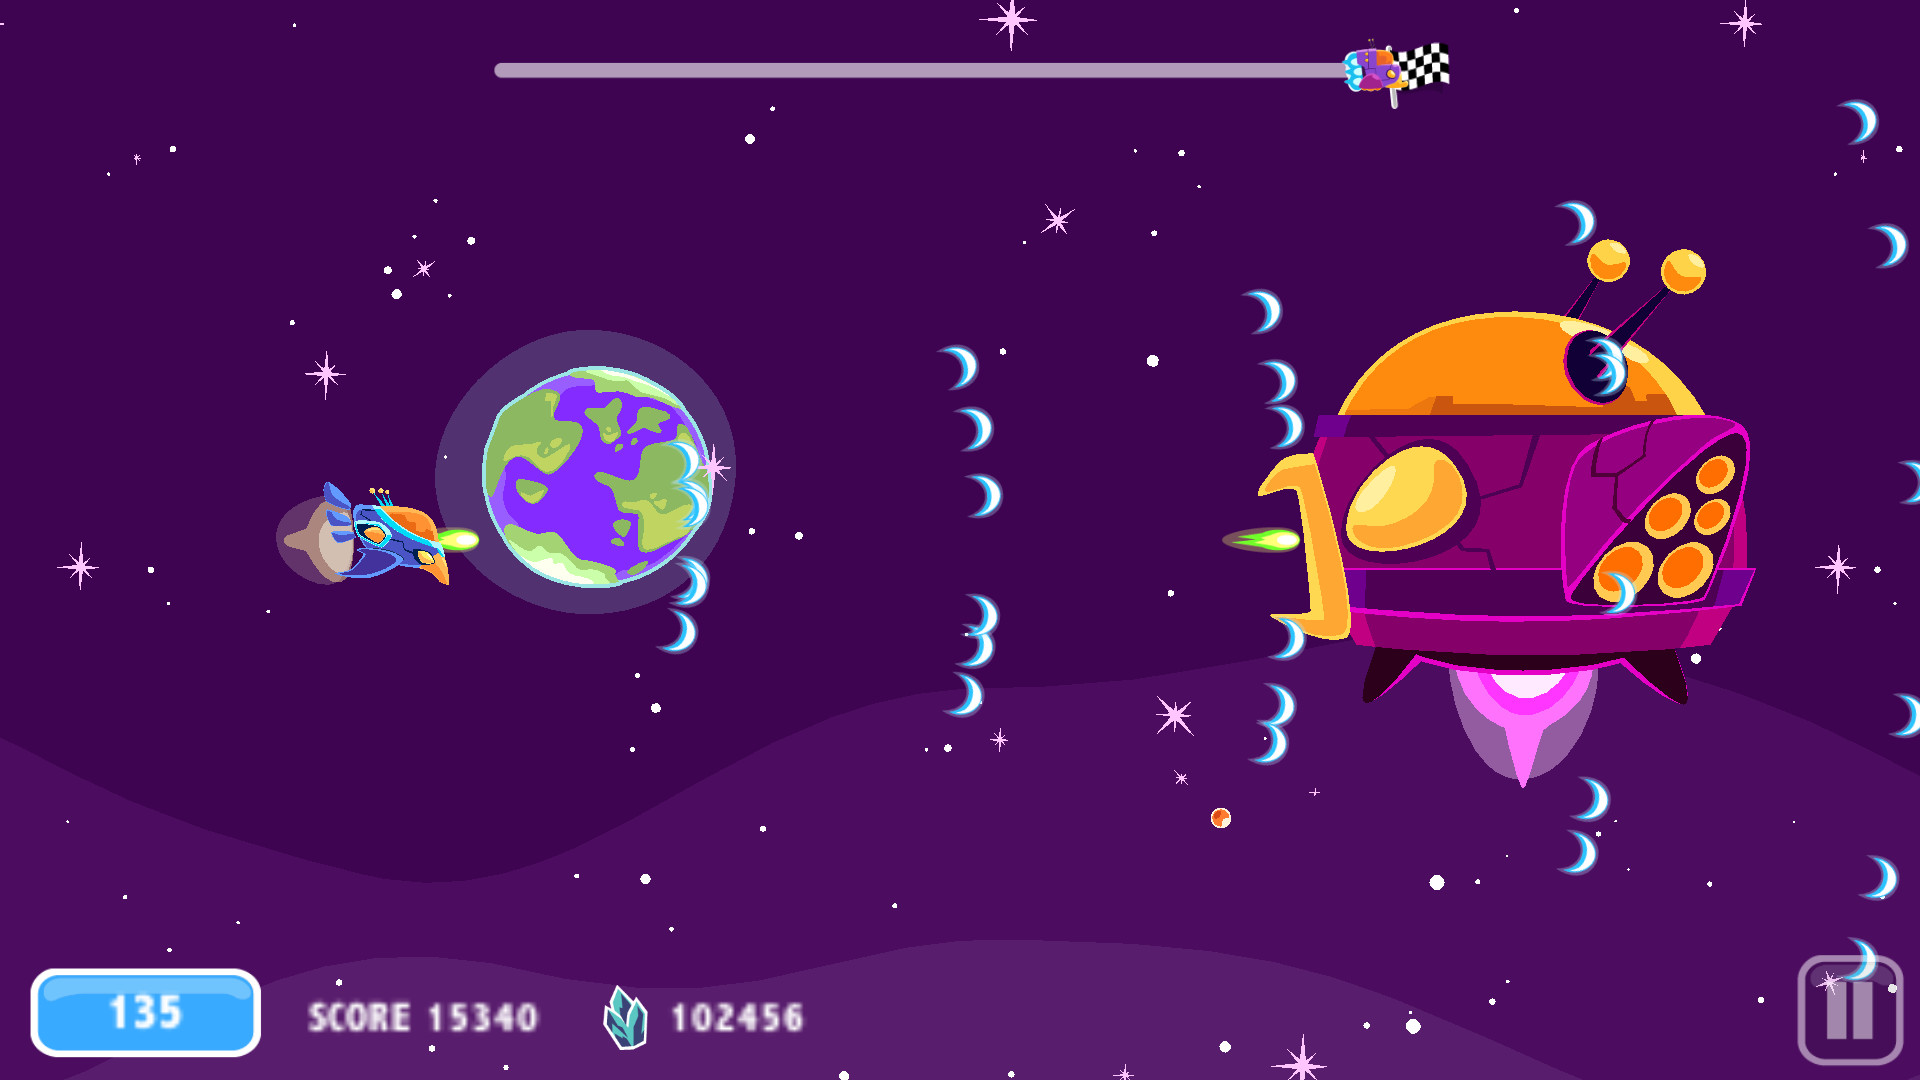 Duck Life: Space 🔥 Play online